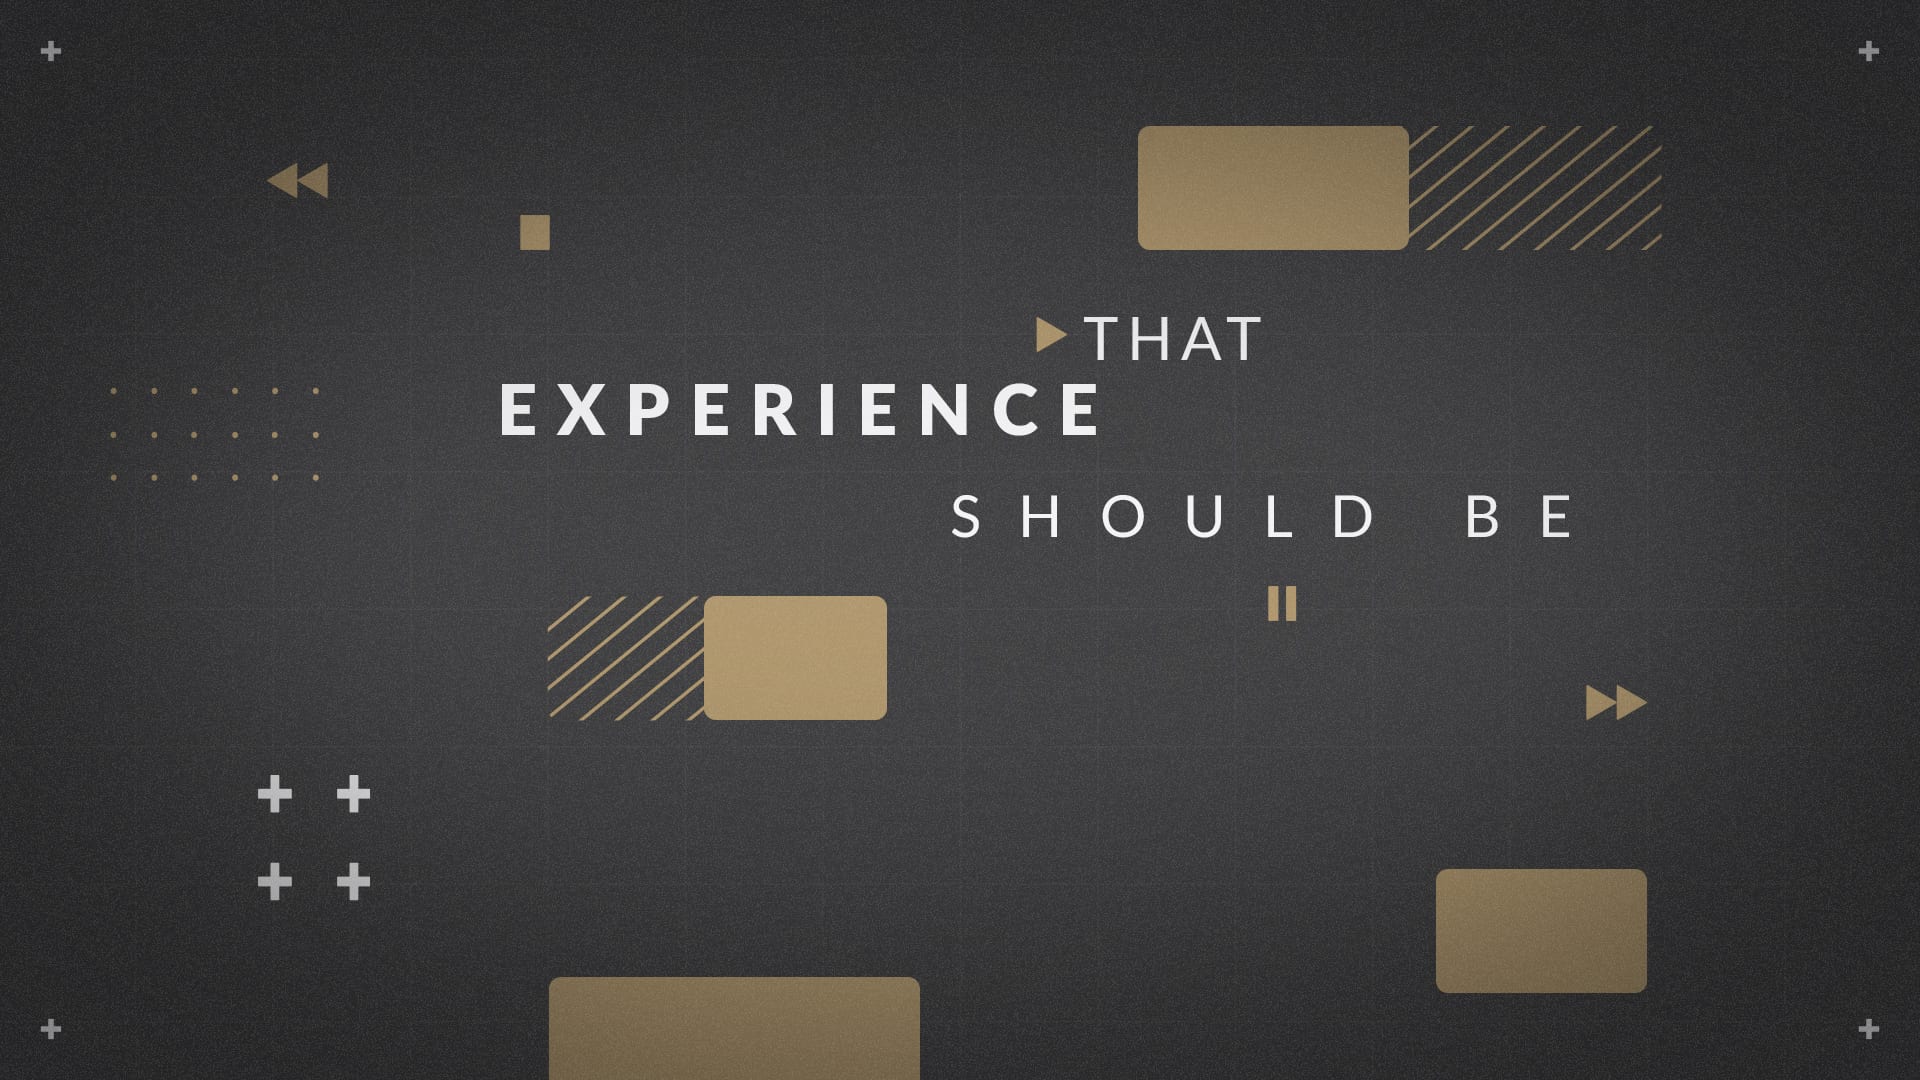 B17 – We think That experiences should be_